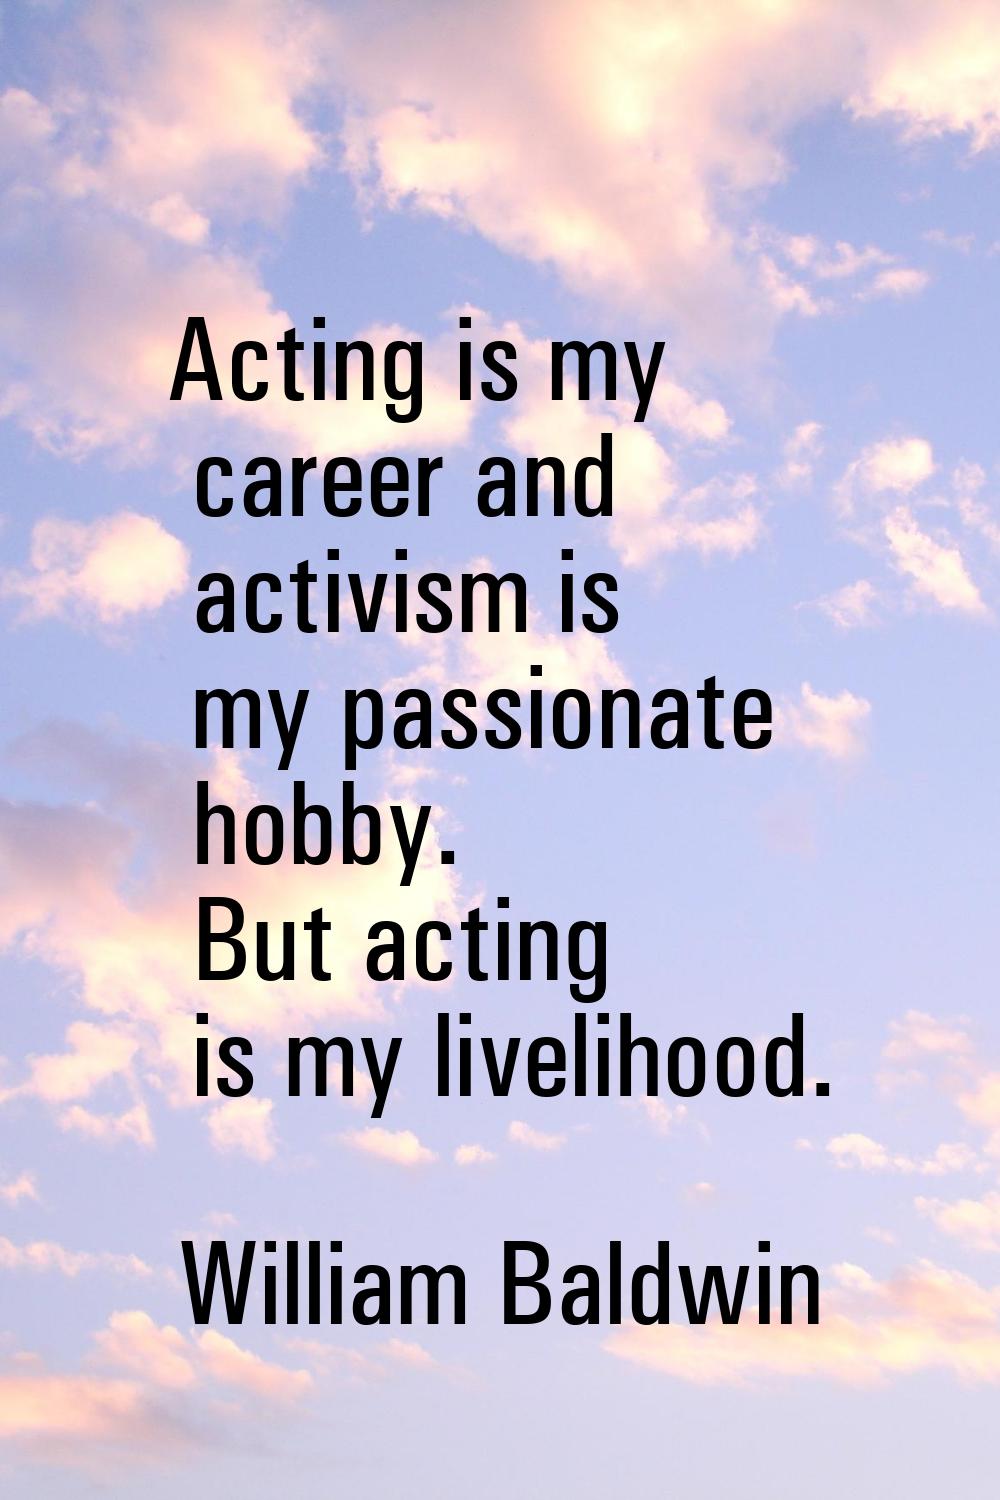 Acting is my career and activism is my passionate hobby. But acting is my livelihood.